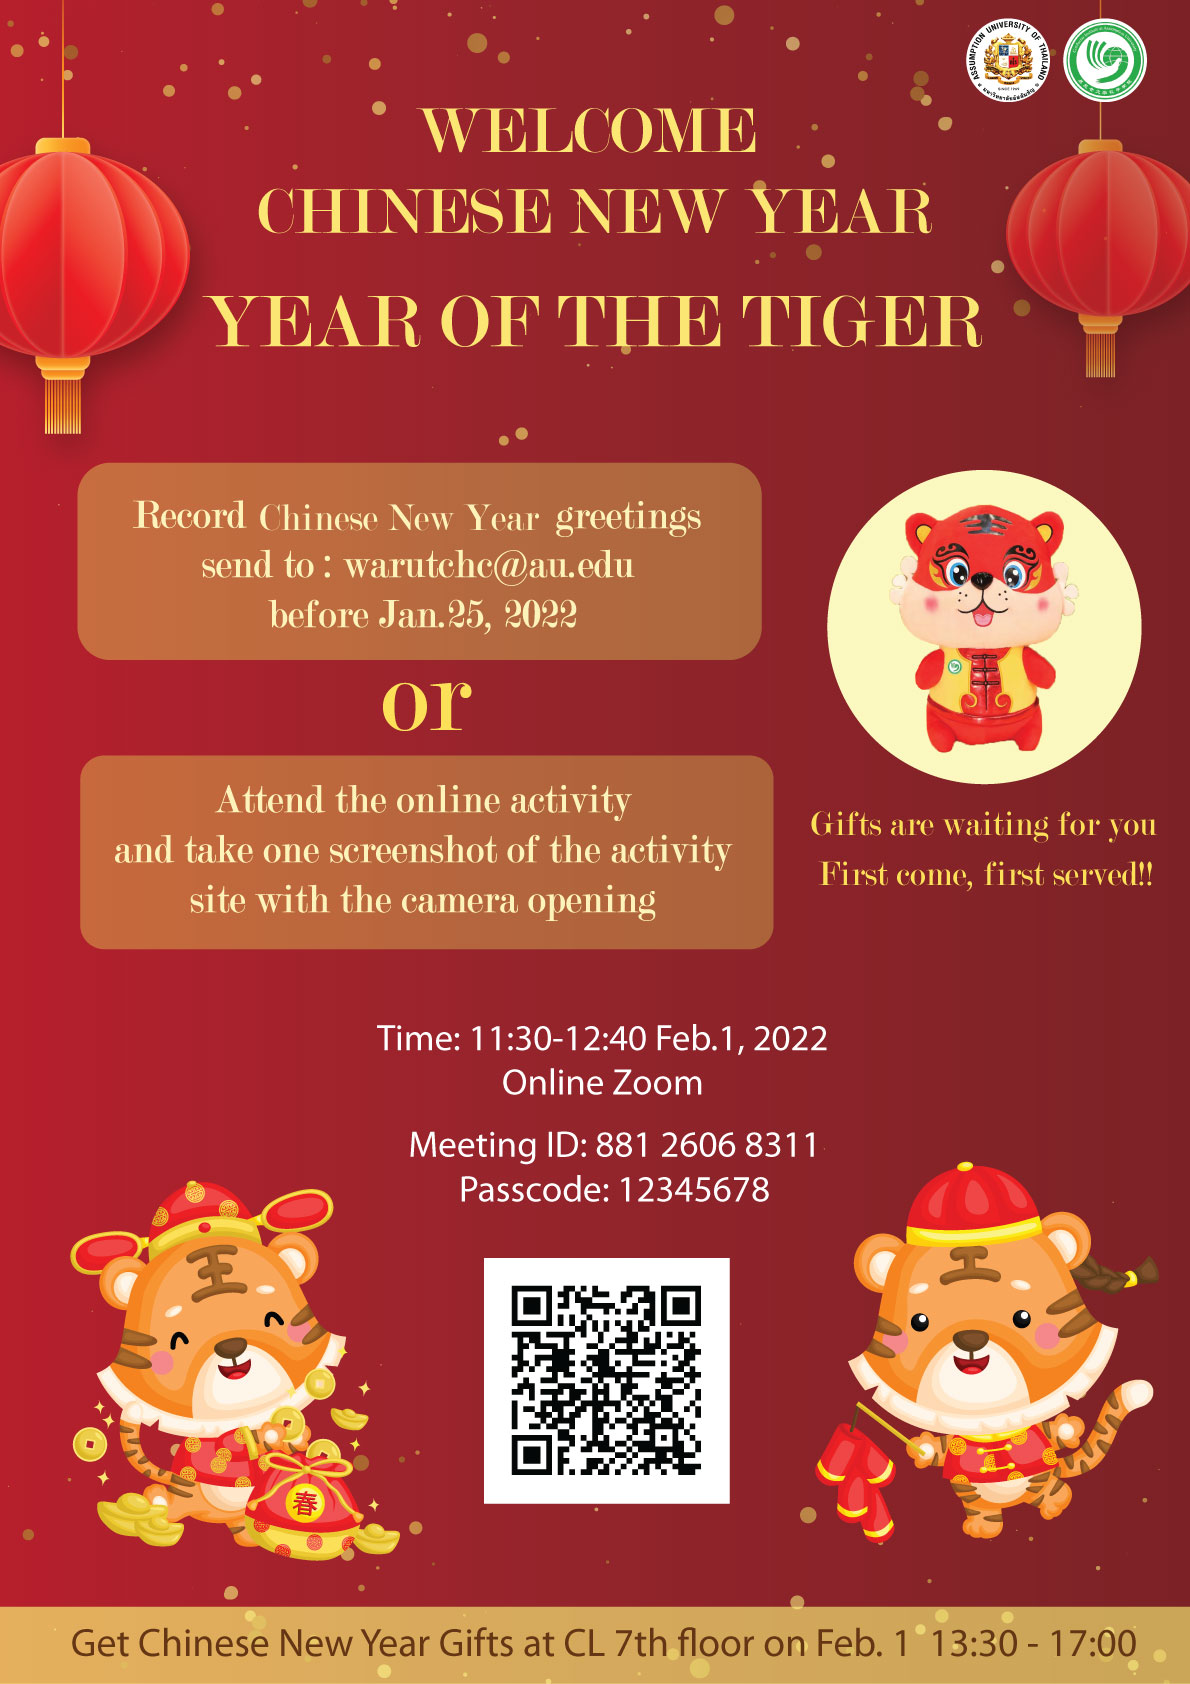 Celebrate the Chinese New Year “Year of the Tiger”